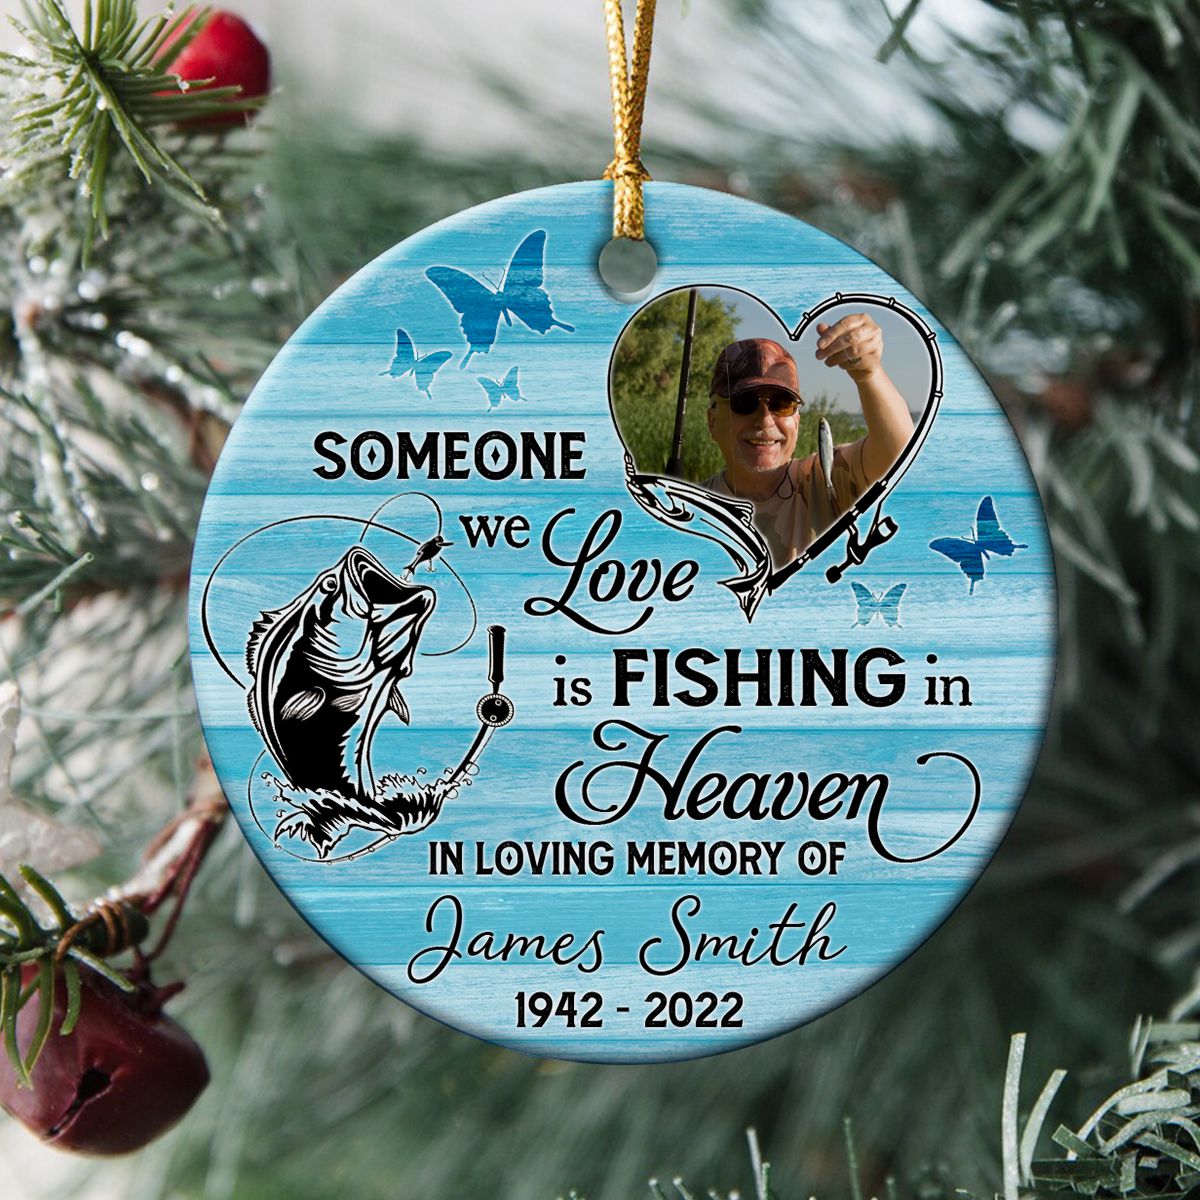 SomeOne I Love Is Fishing In Heaven Ornament, Memory Christmas Ornament  sold by Dan O'connor, SKU 31286560